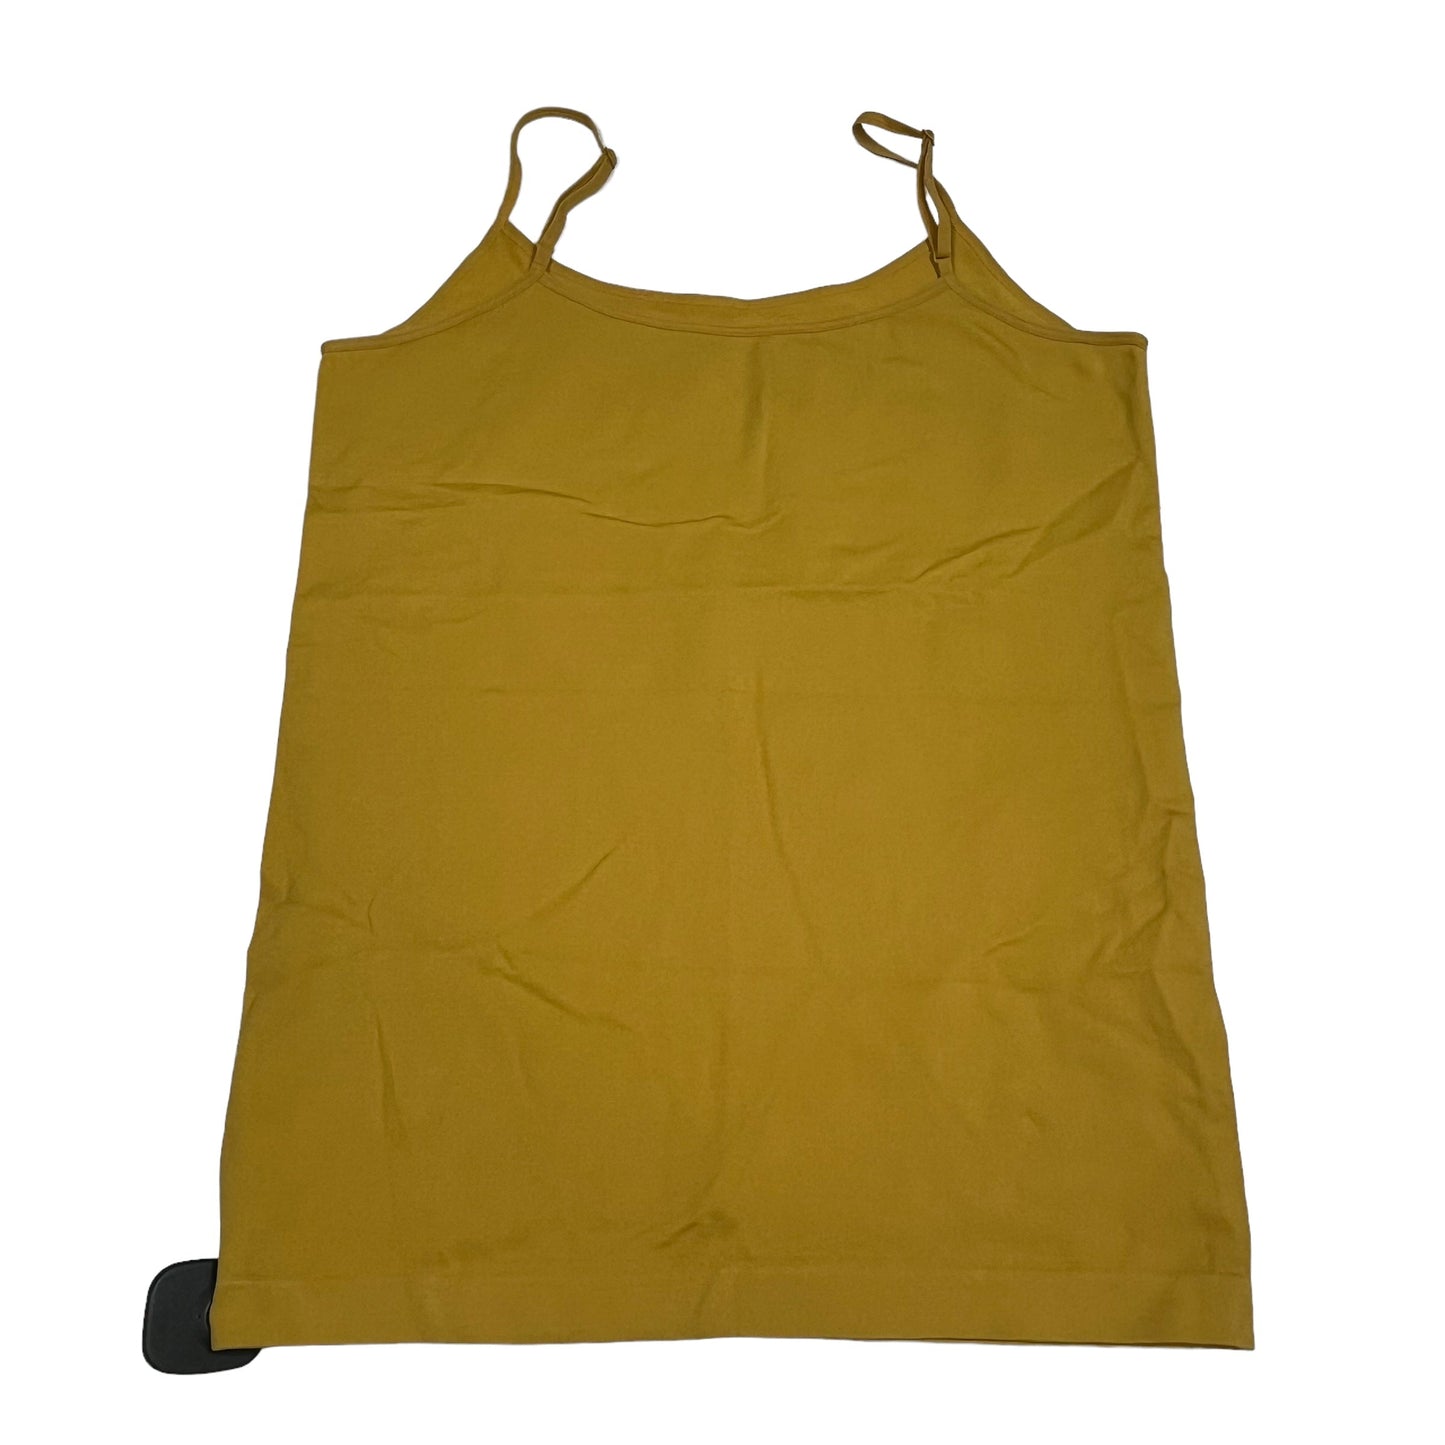 Yellow Top Cami Cato, Size Xl